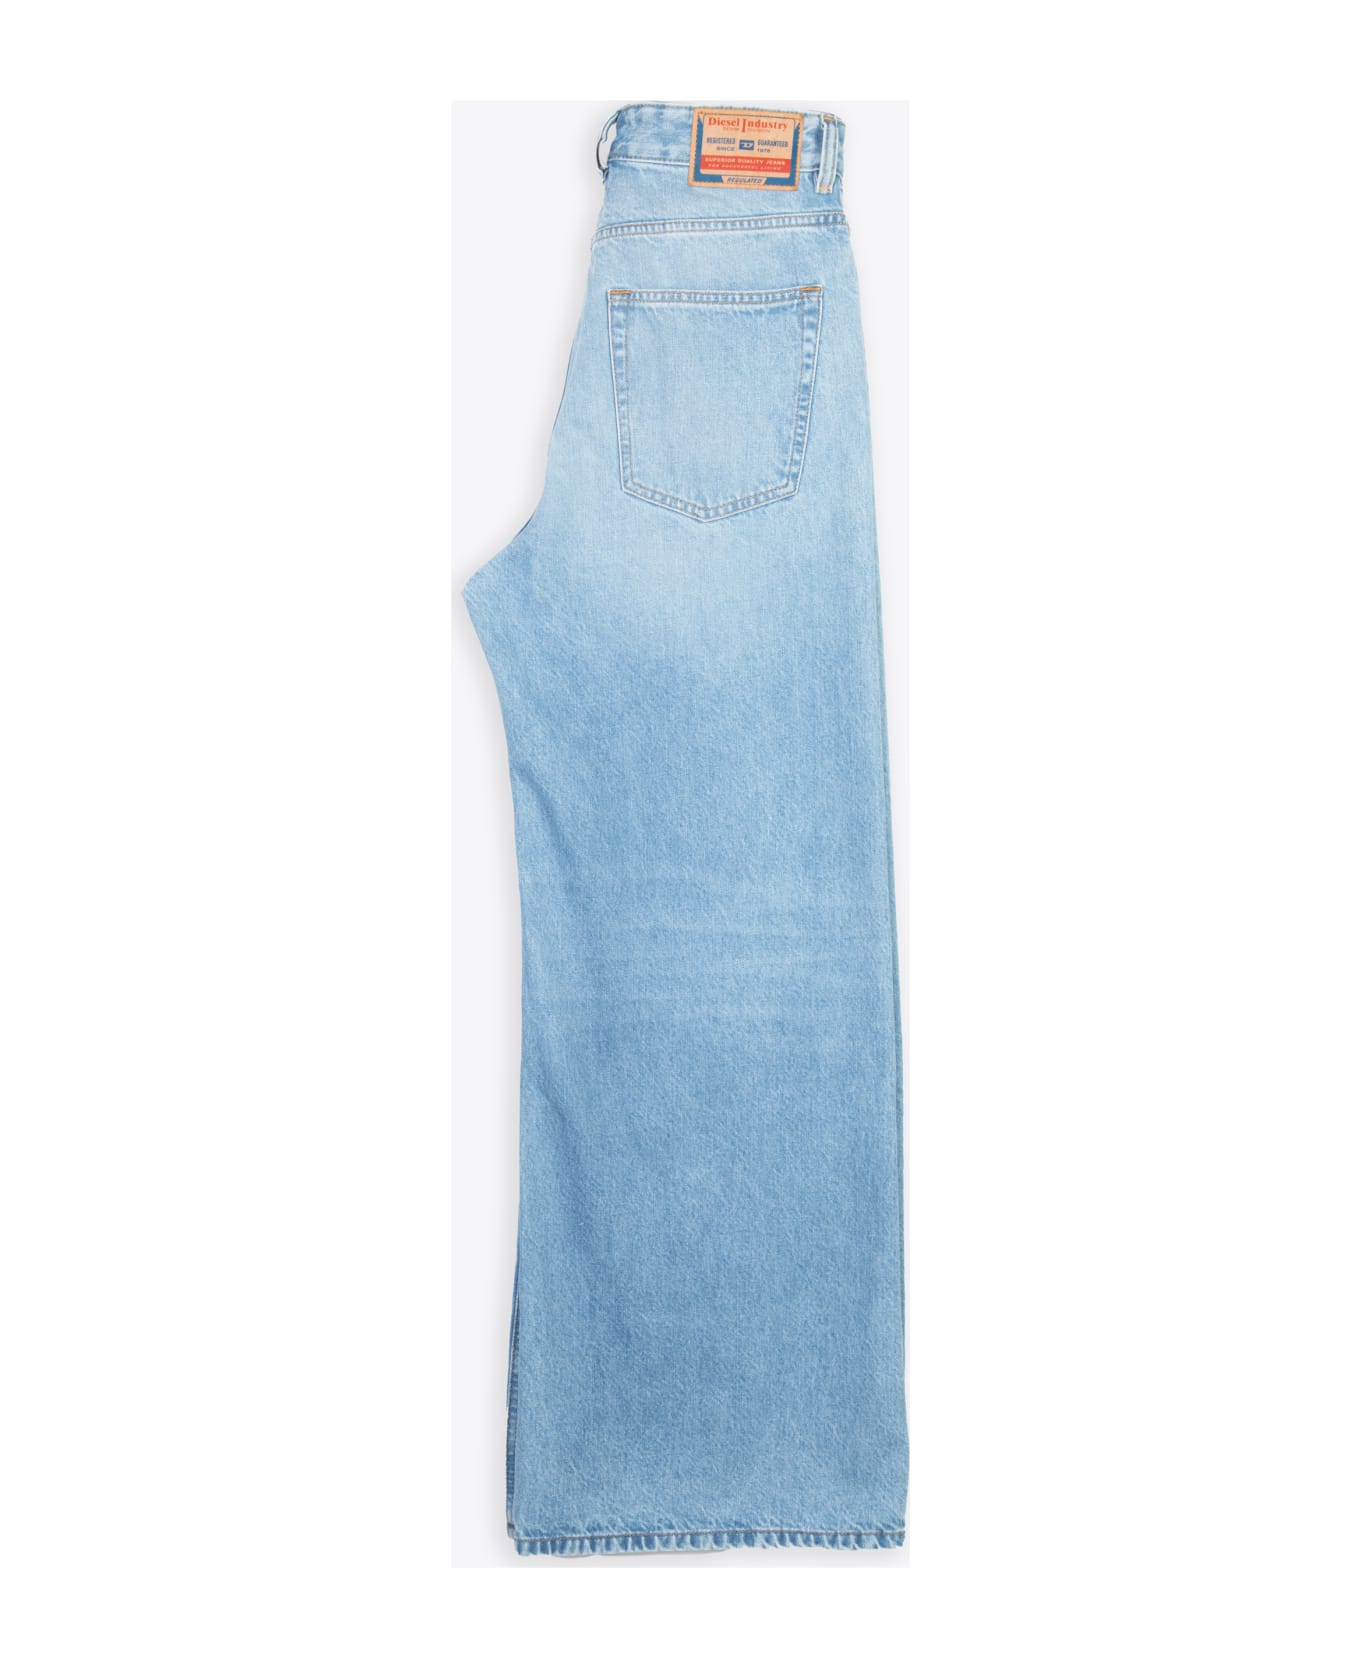 Diesel 1996 D-sire L.30 Washed Light Blue Denim Baggy Pant - 1996 D-sire - Light Blue ボトムス